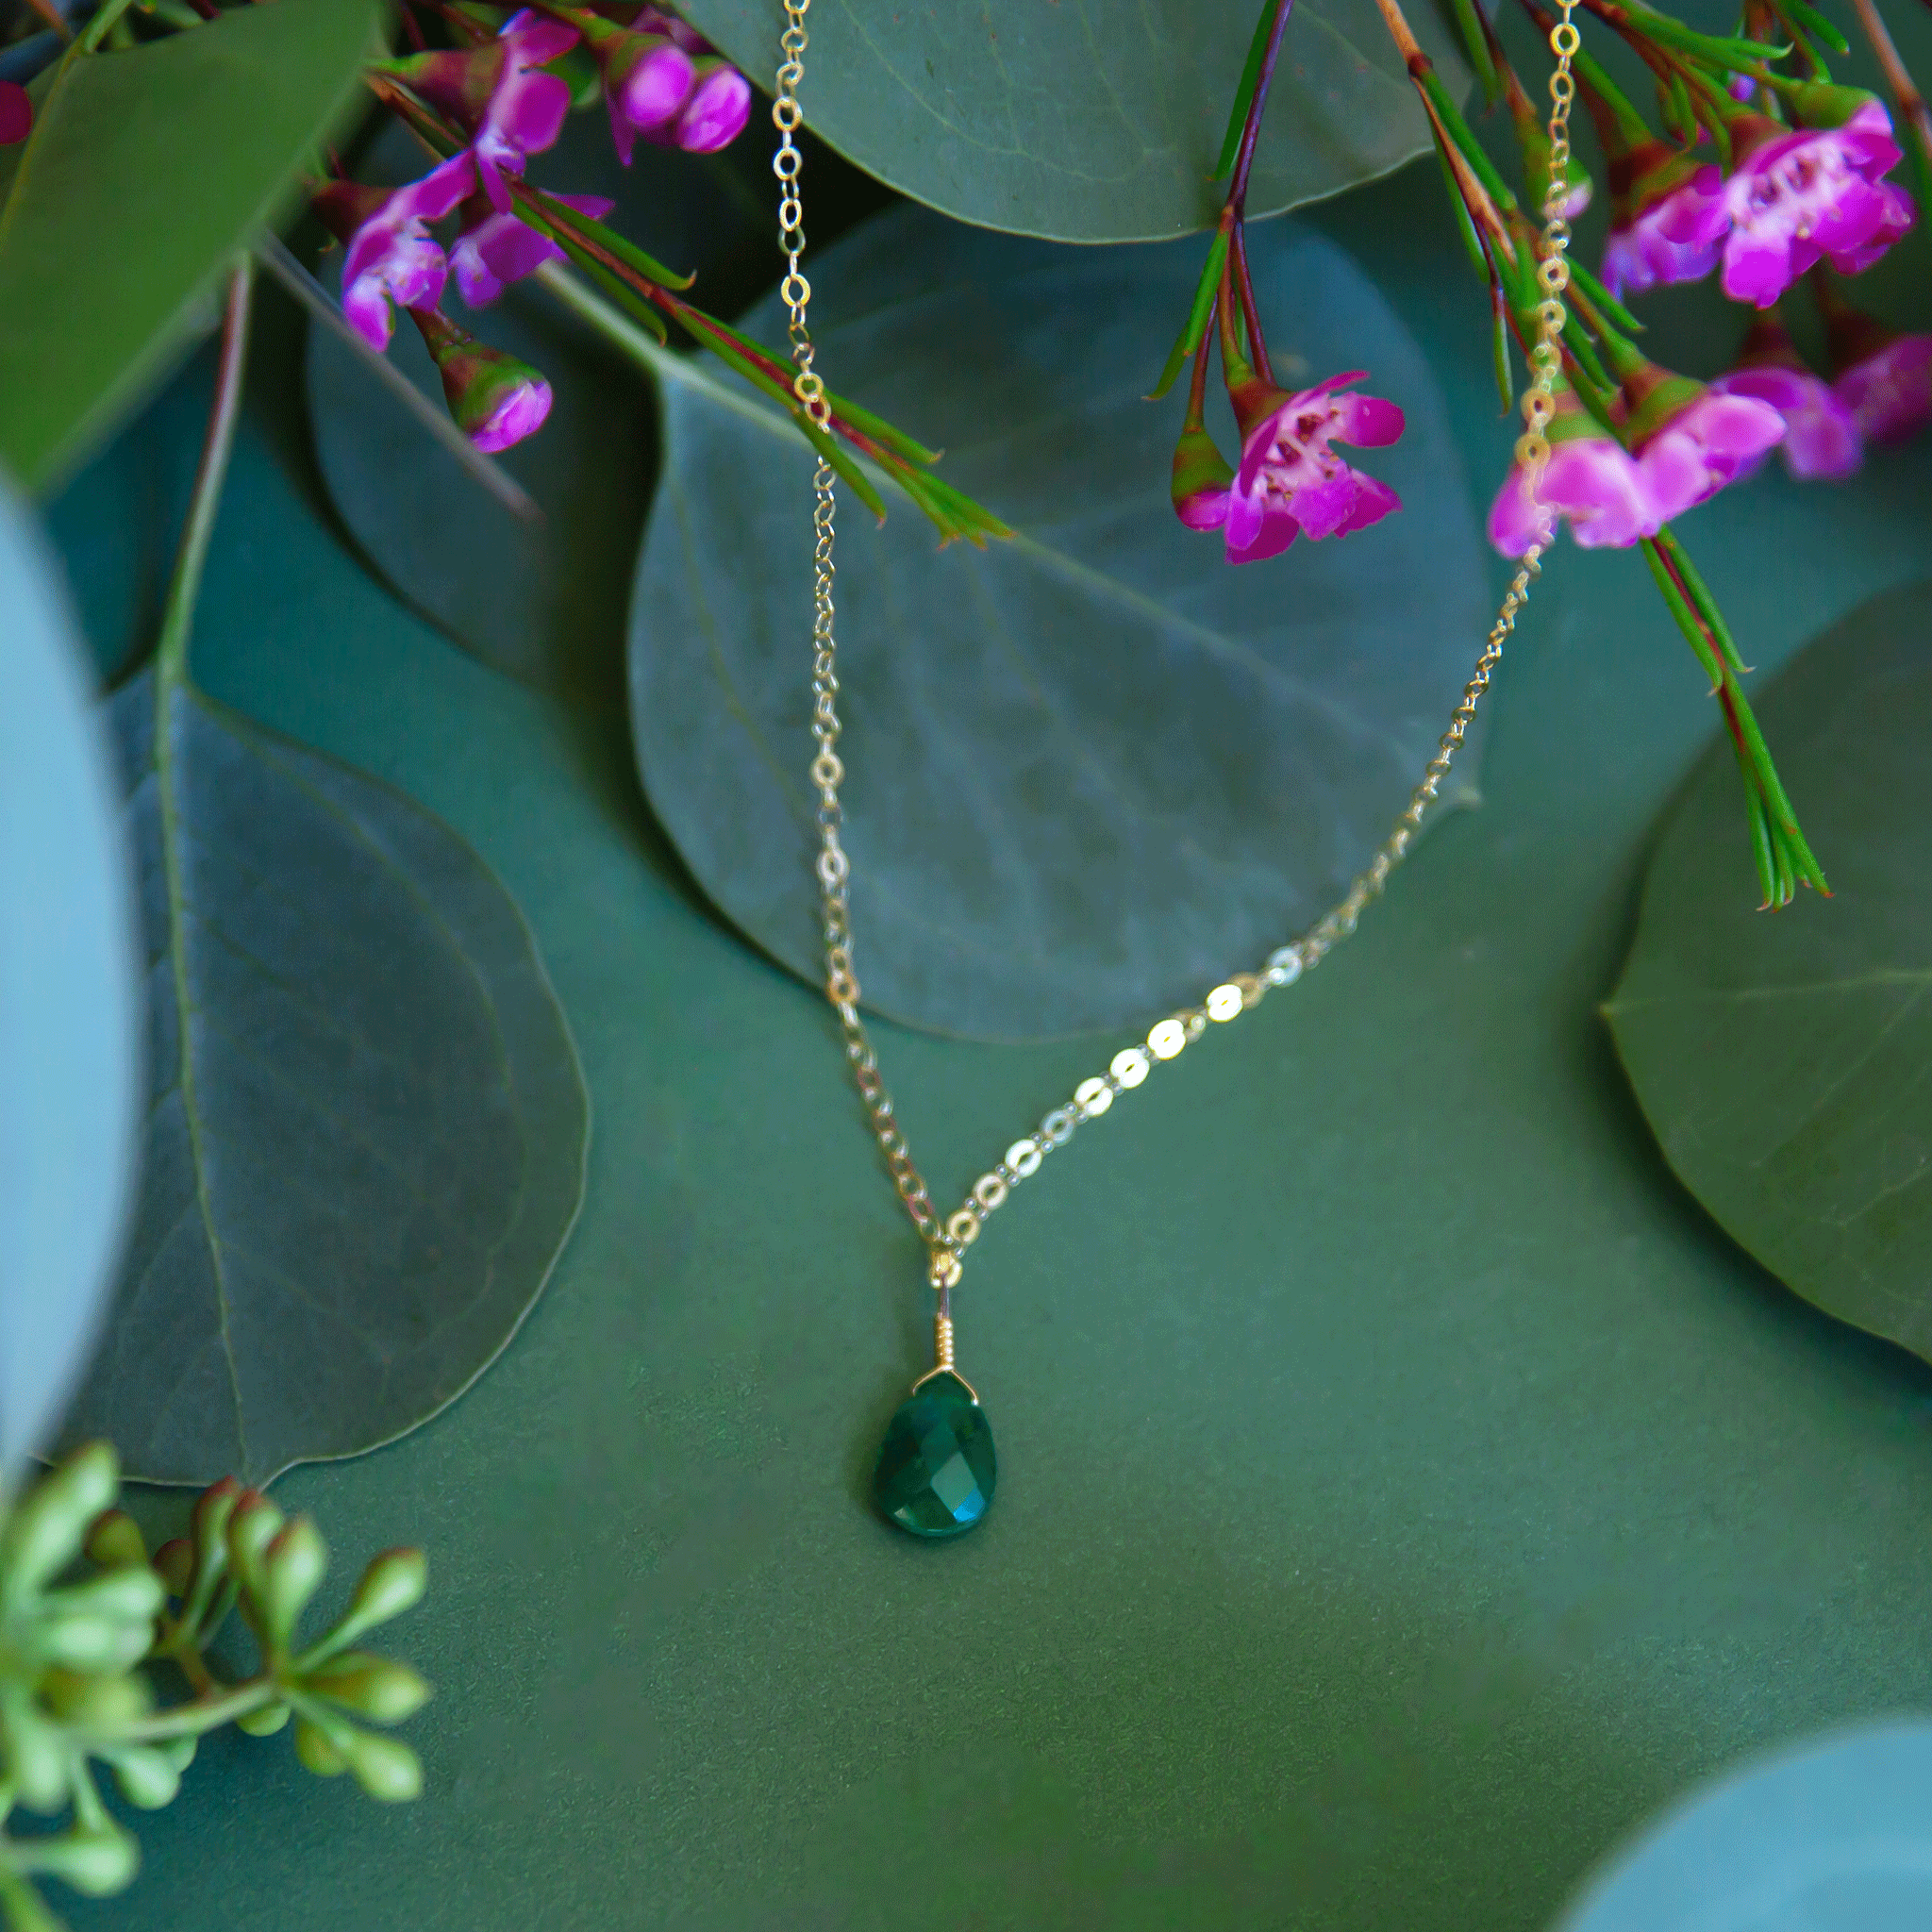 A gold chain necklace with a emerald stone charm in the center.